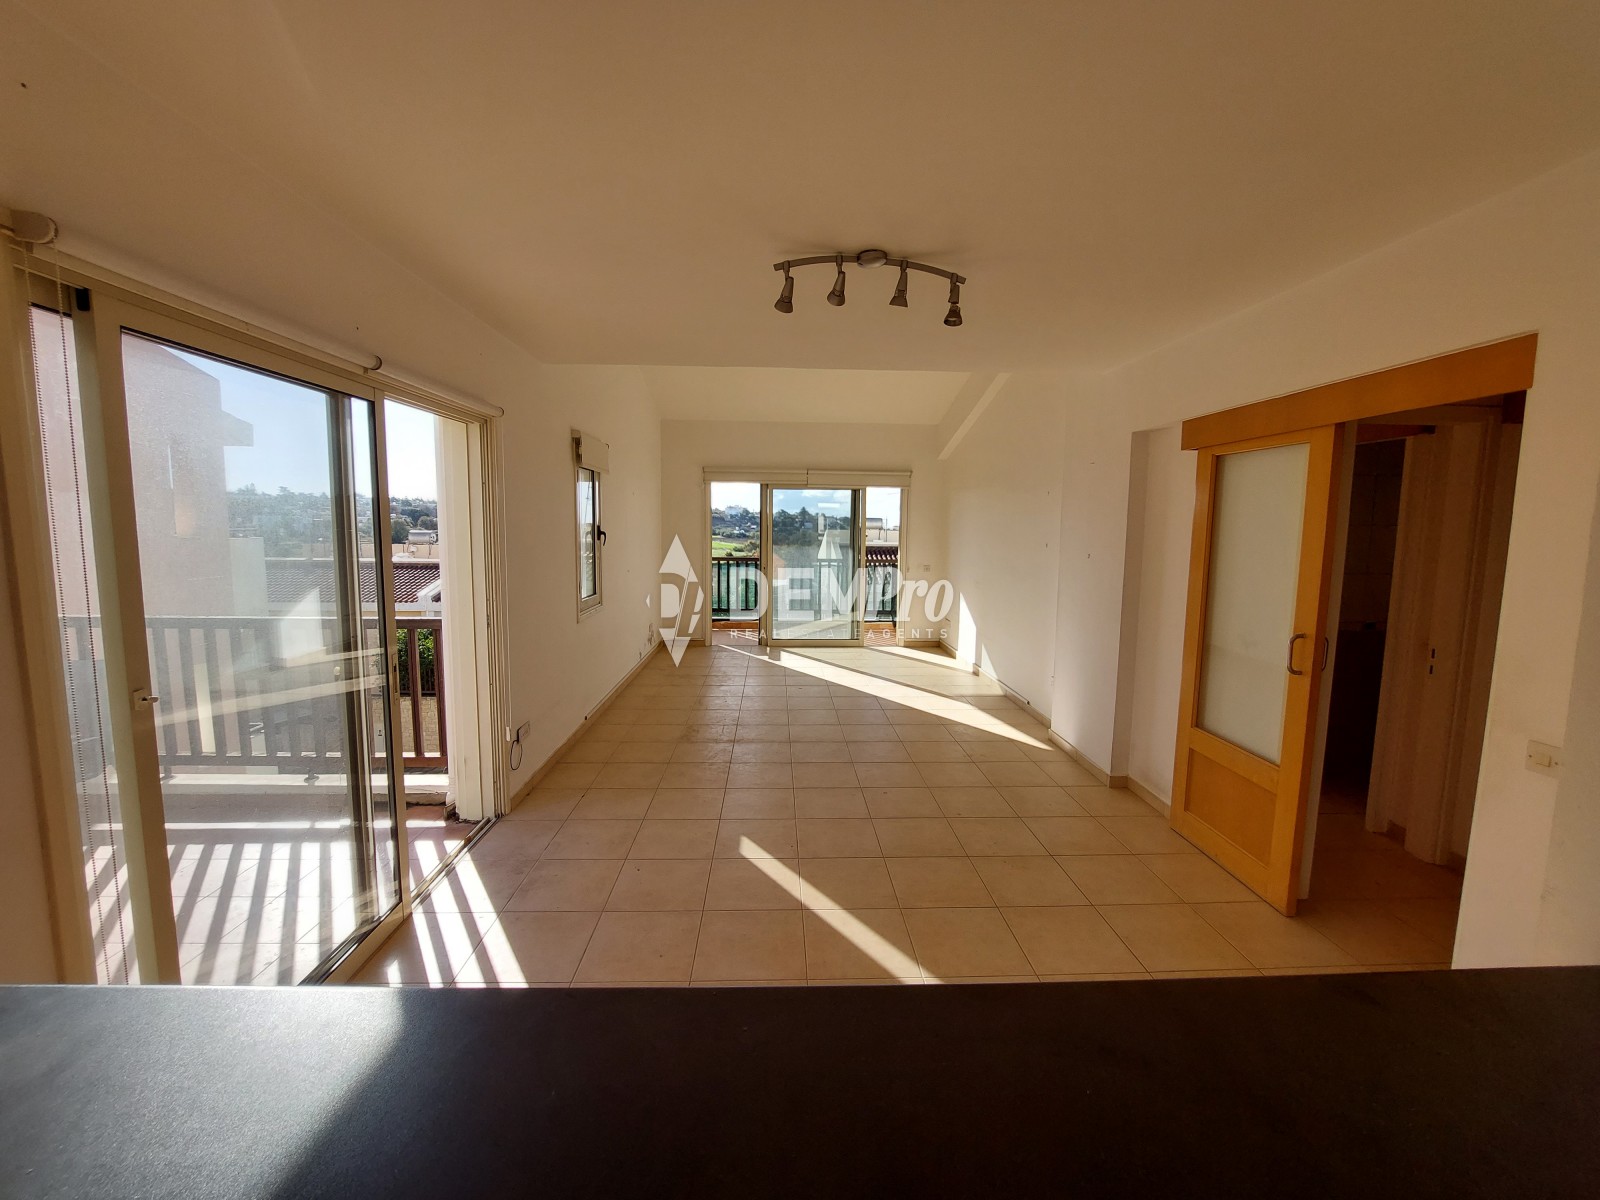 Apartment For Sale in Chloraka, Paphos - DP3857